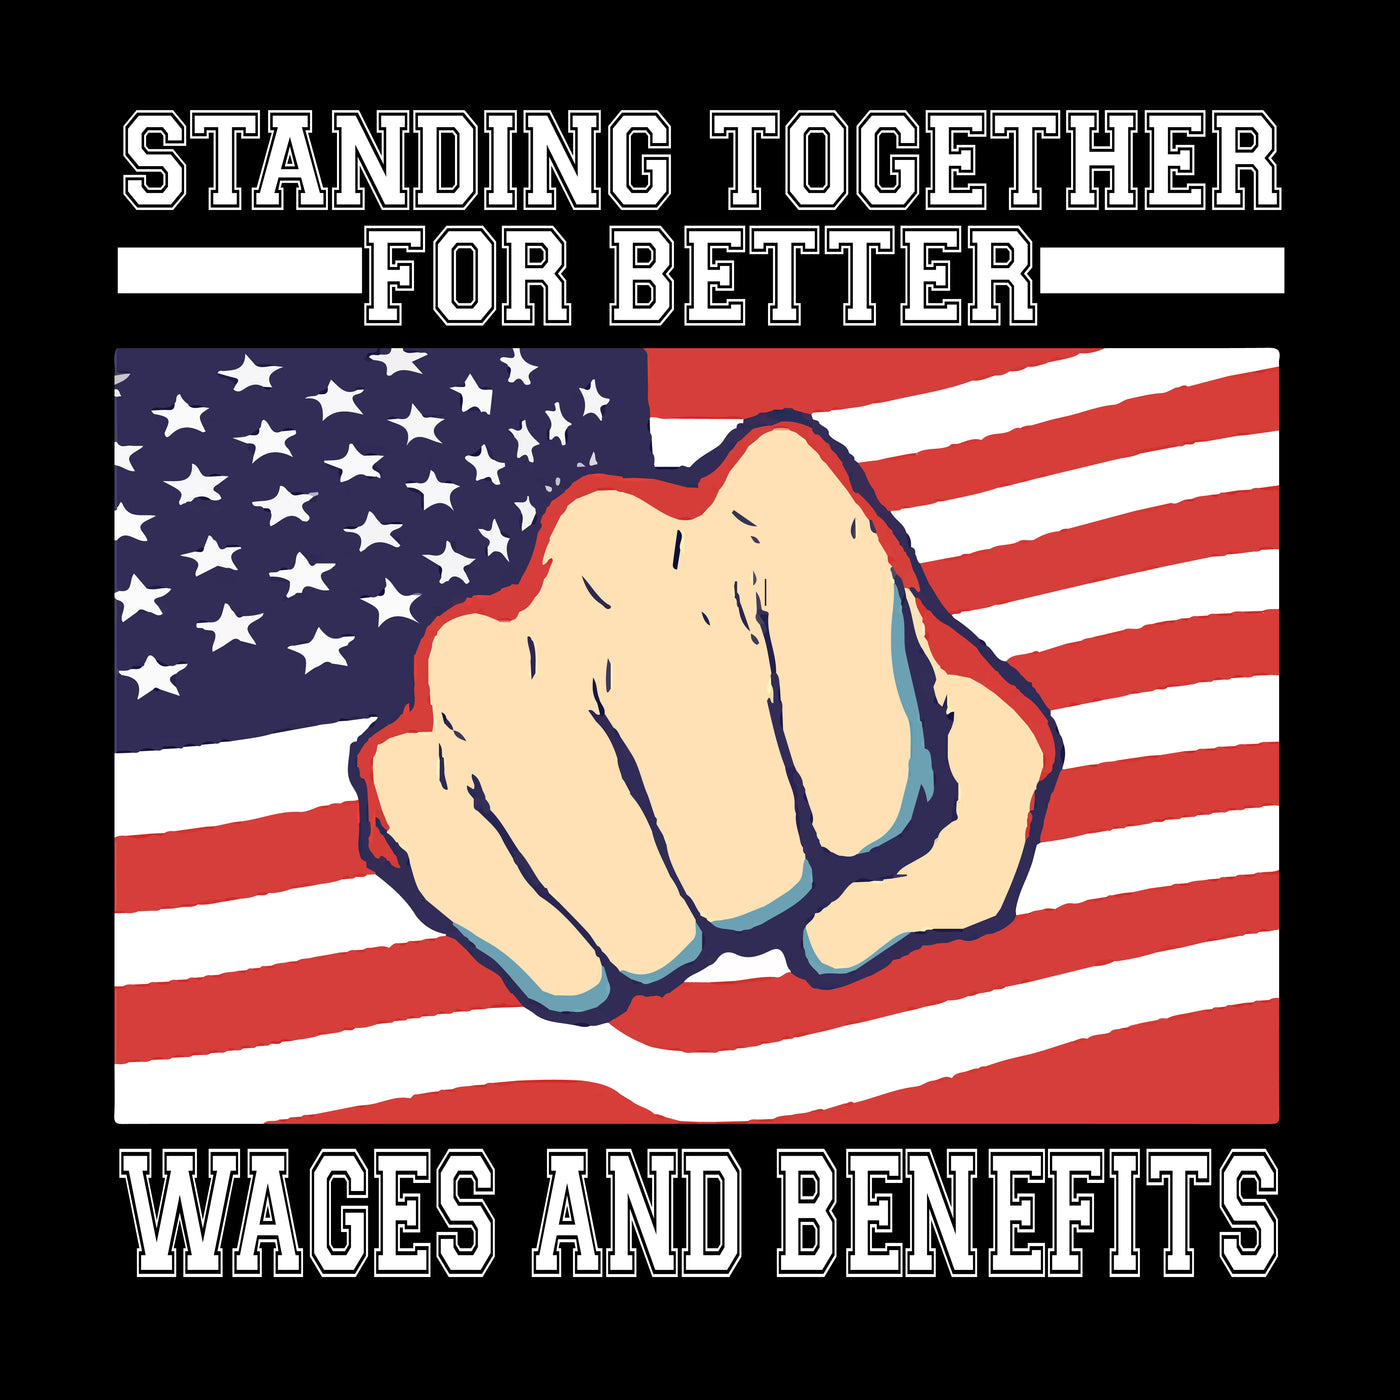 Wages And Benefits